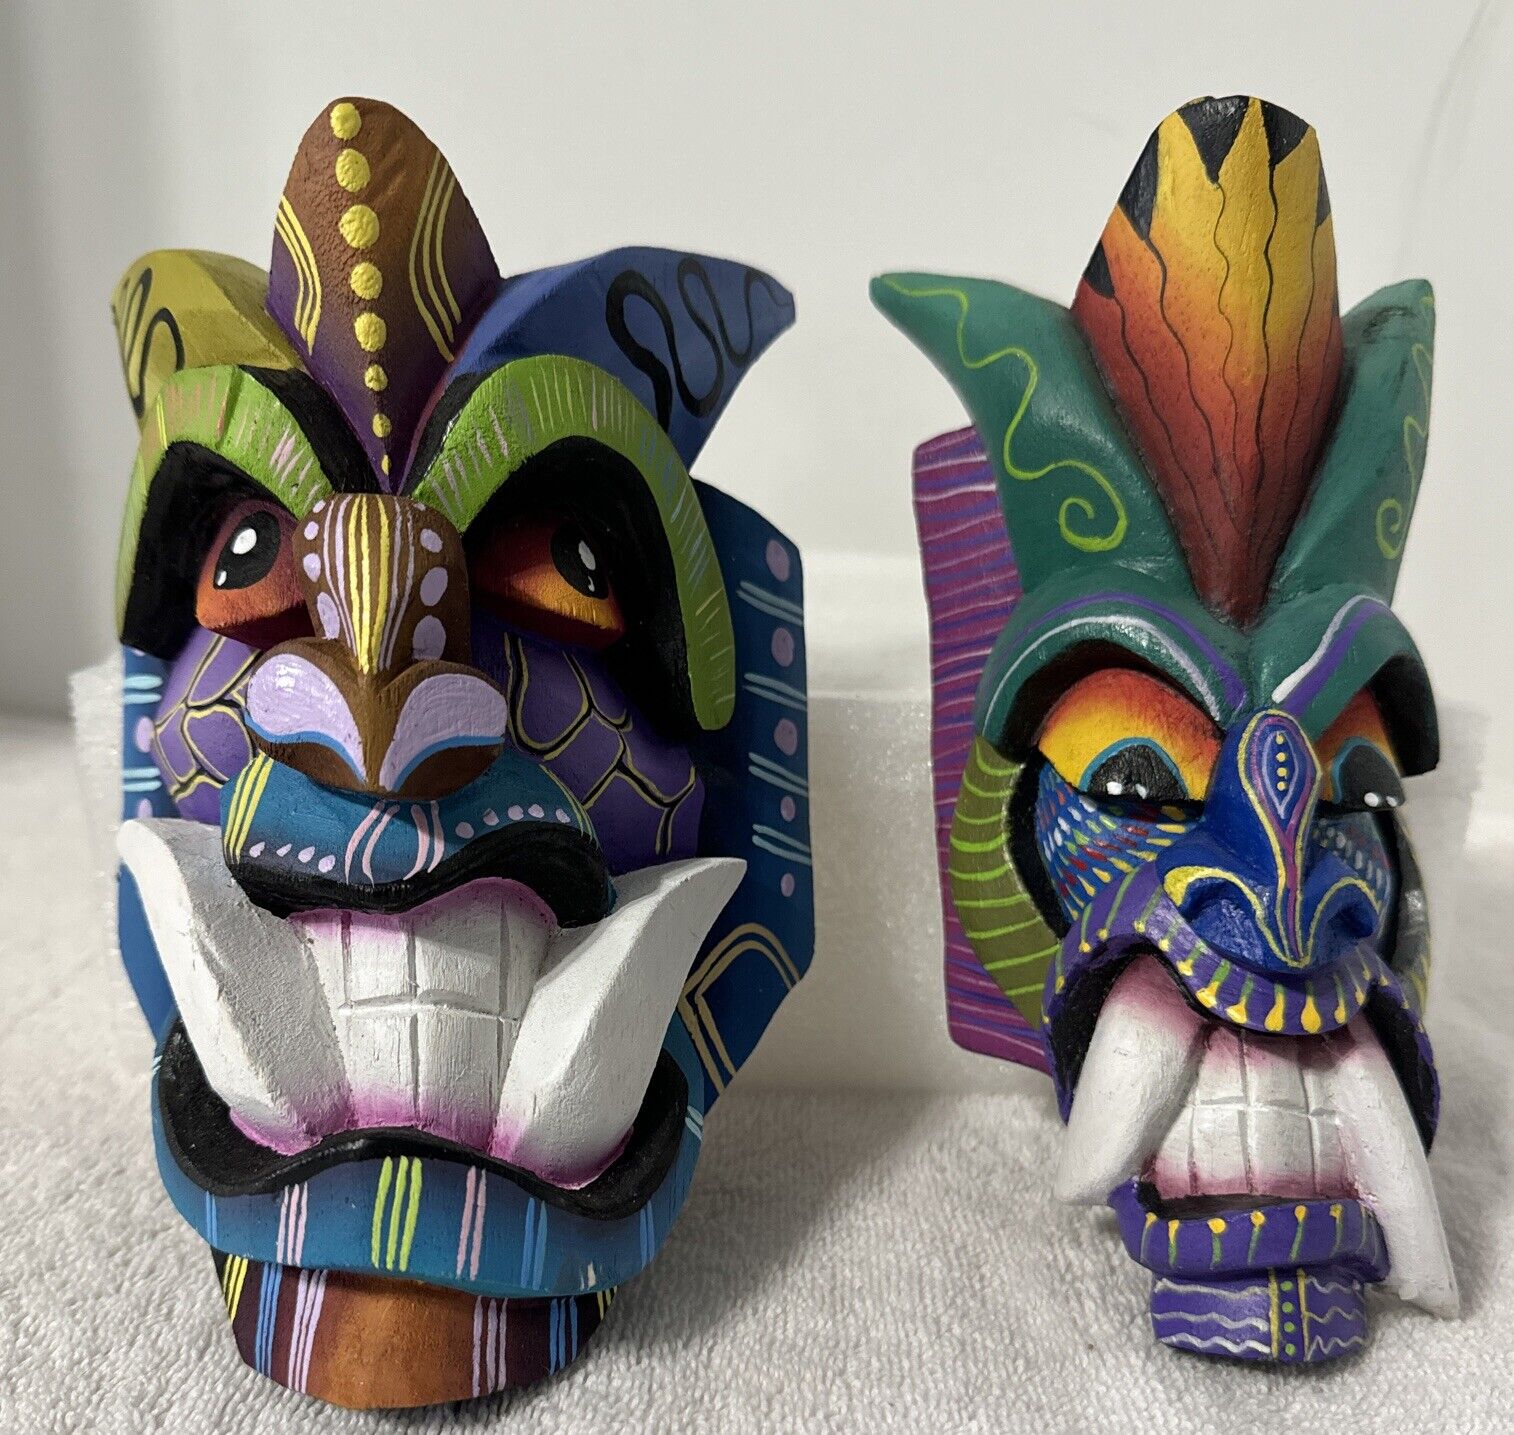 2-Signed Hand Painted BORUCA Carved Wood Mask Costa Rica Small